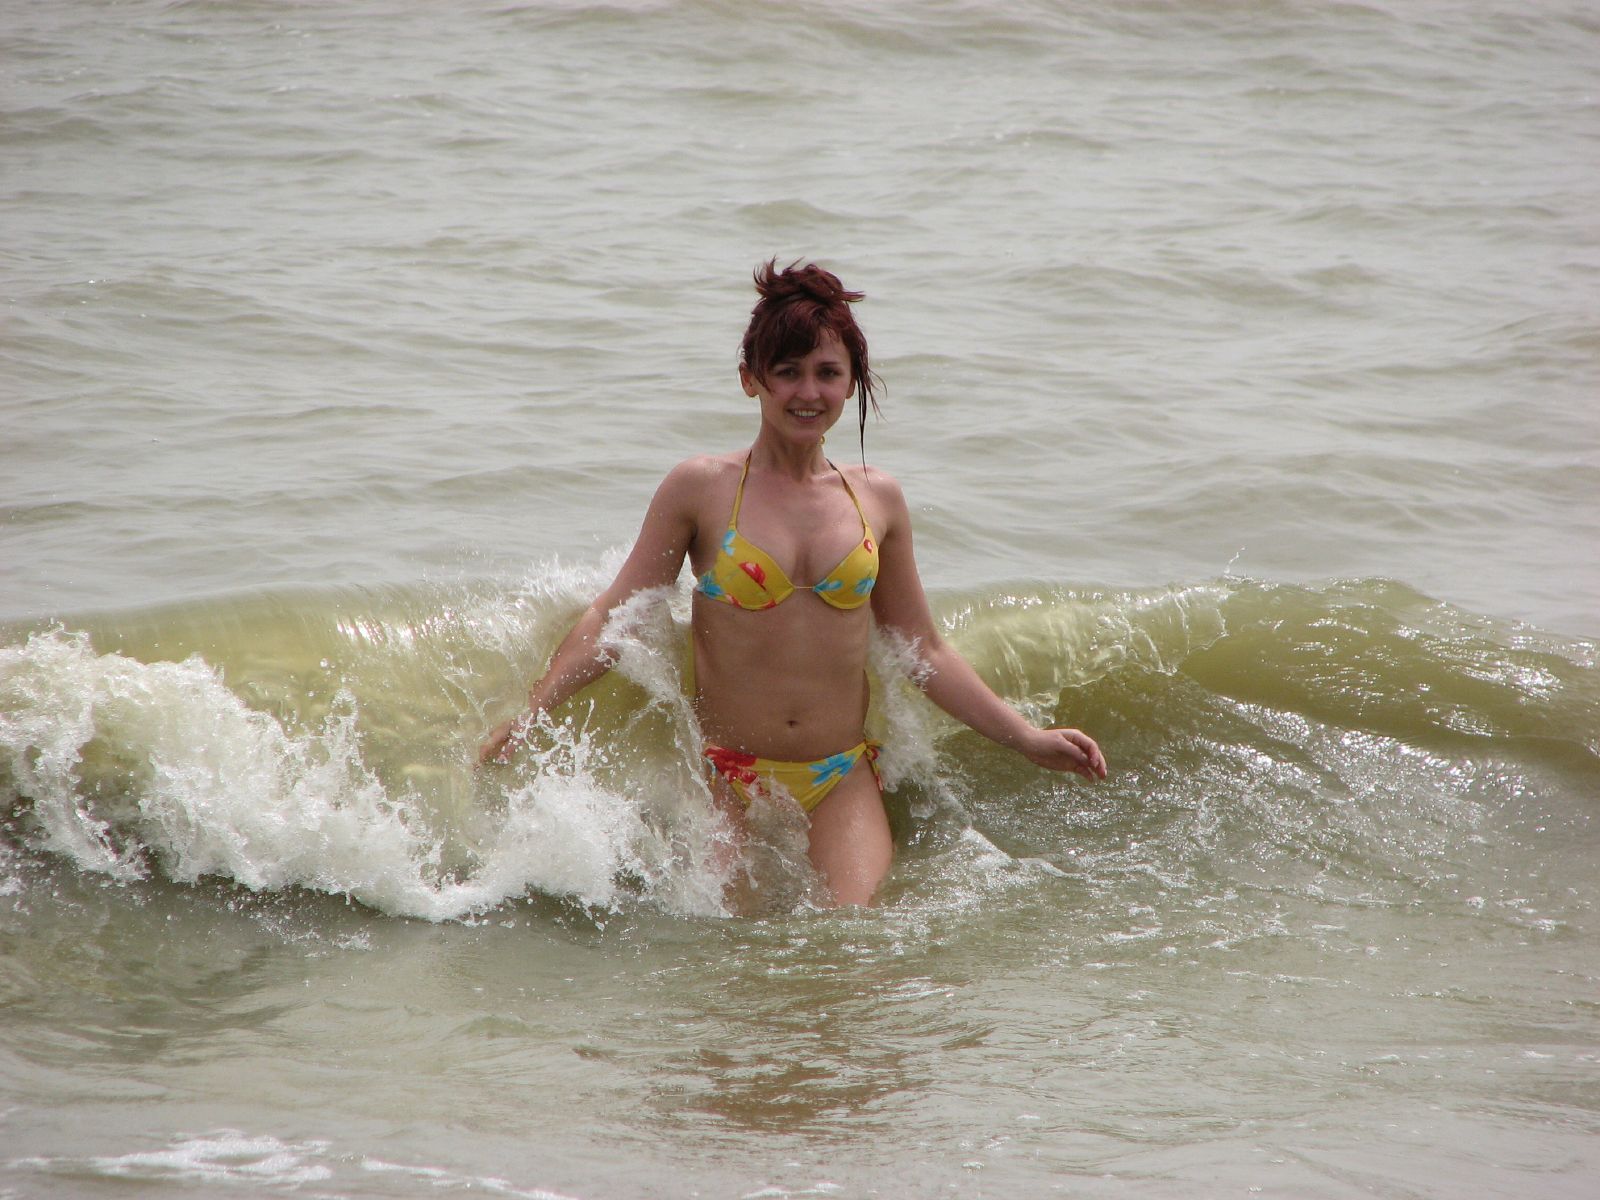 File:Young woman in the water.jpg - Wikipedia